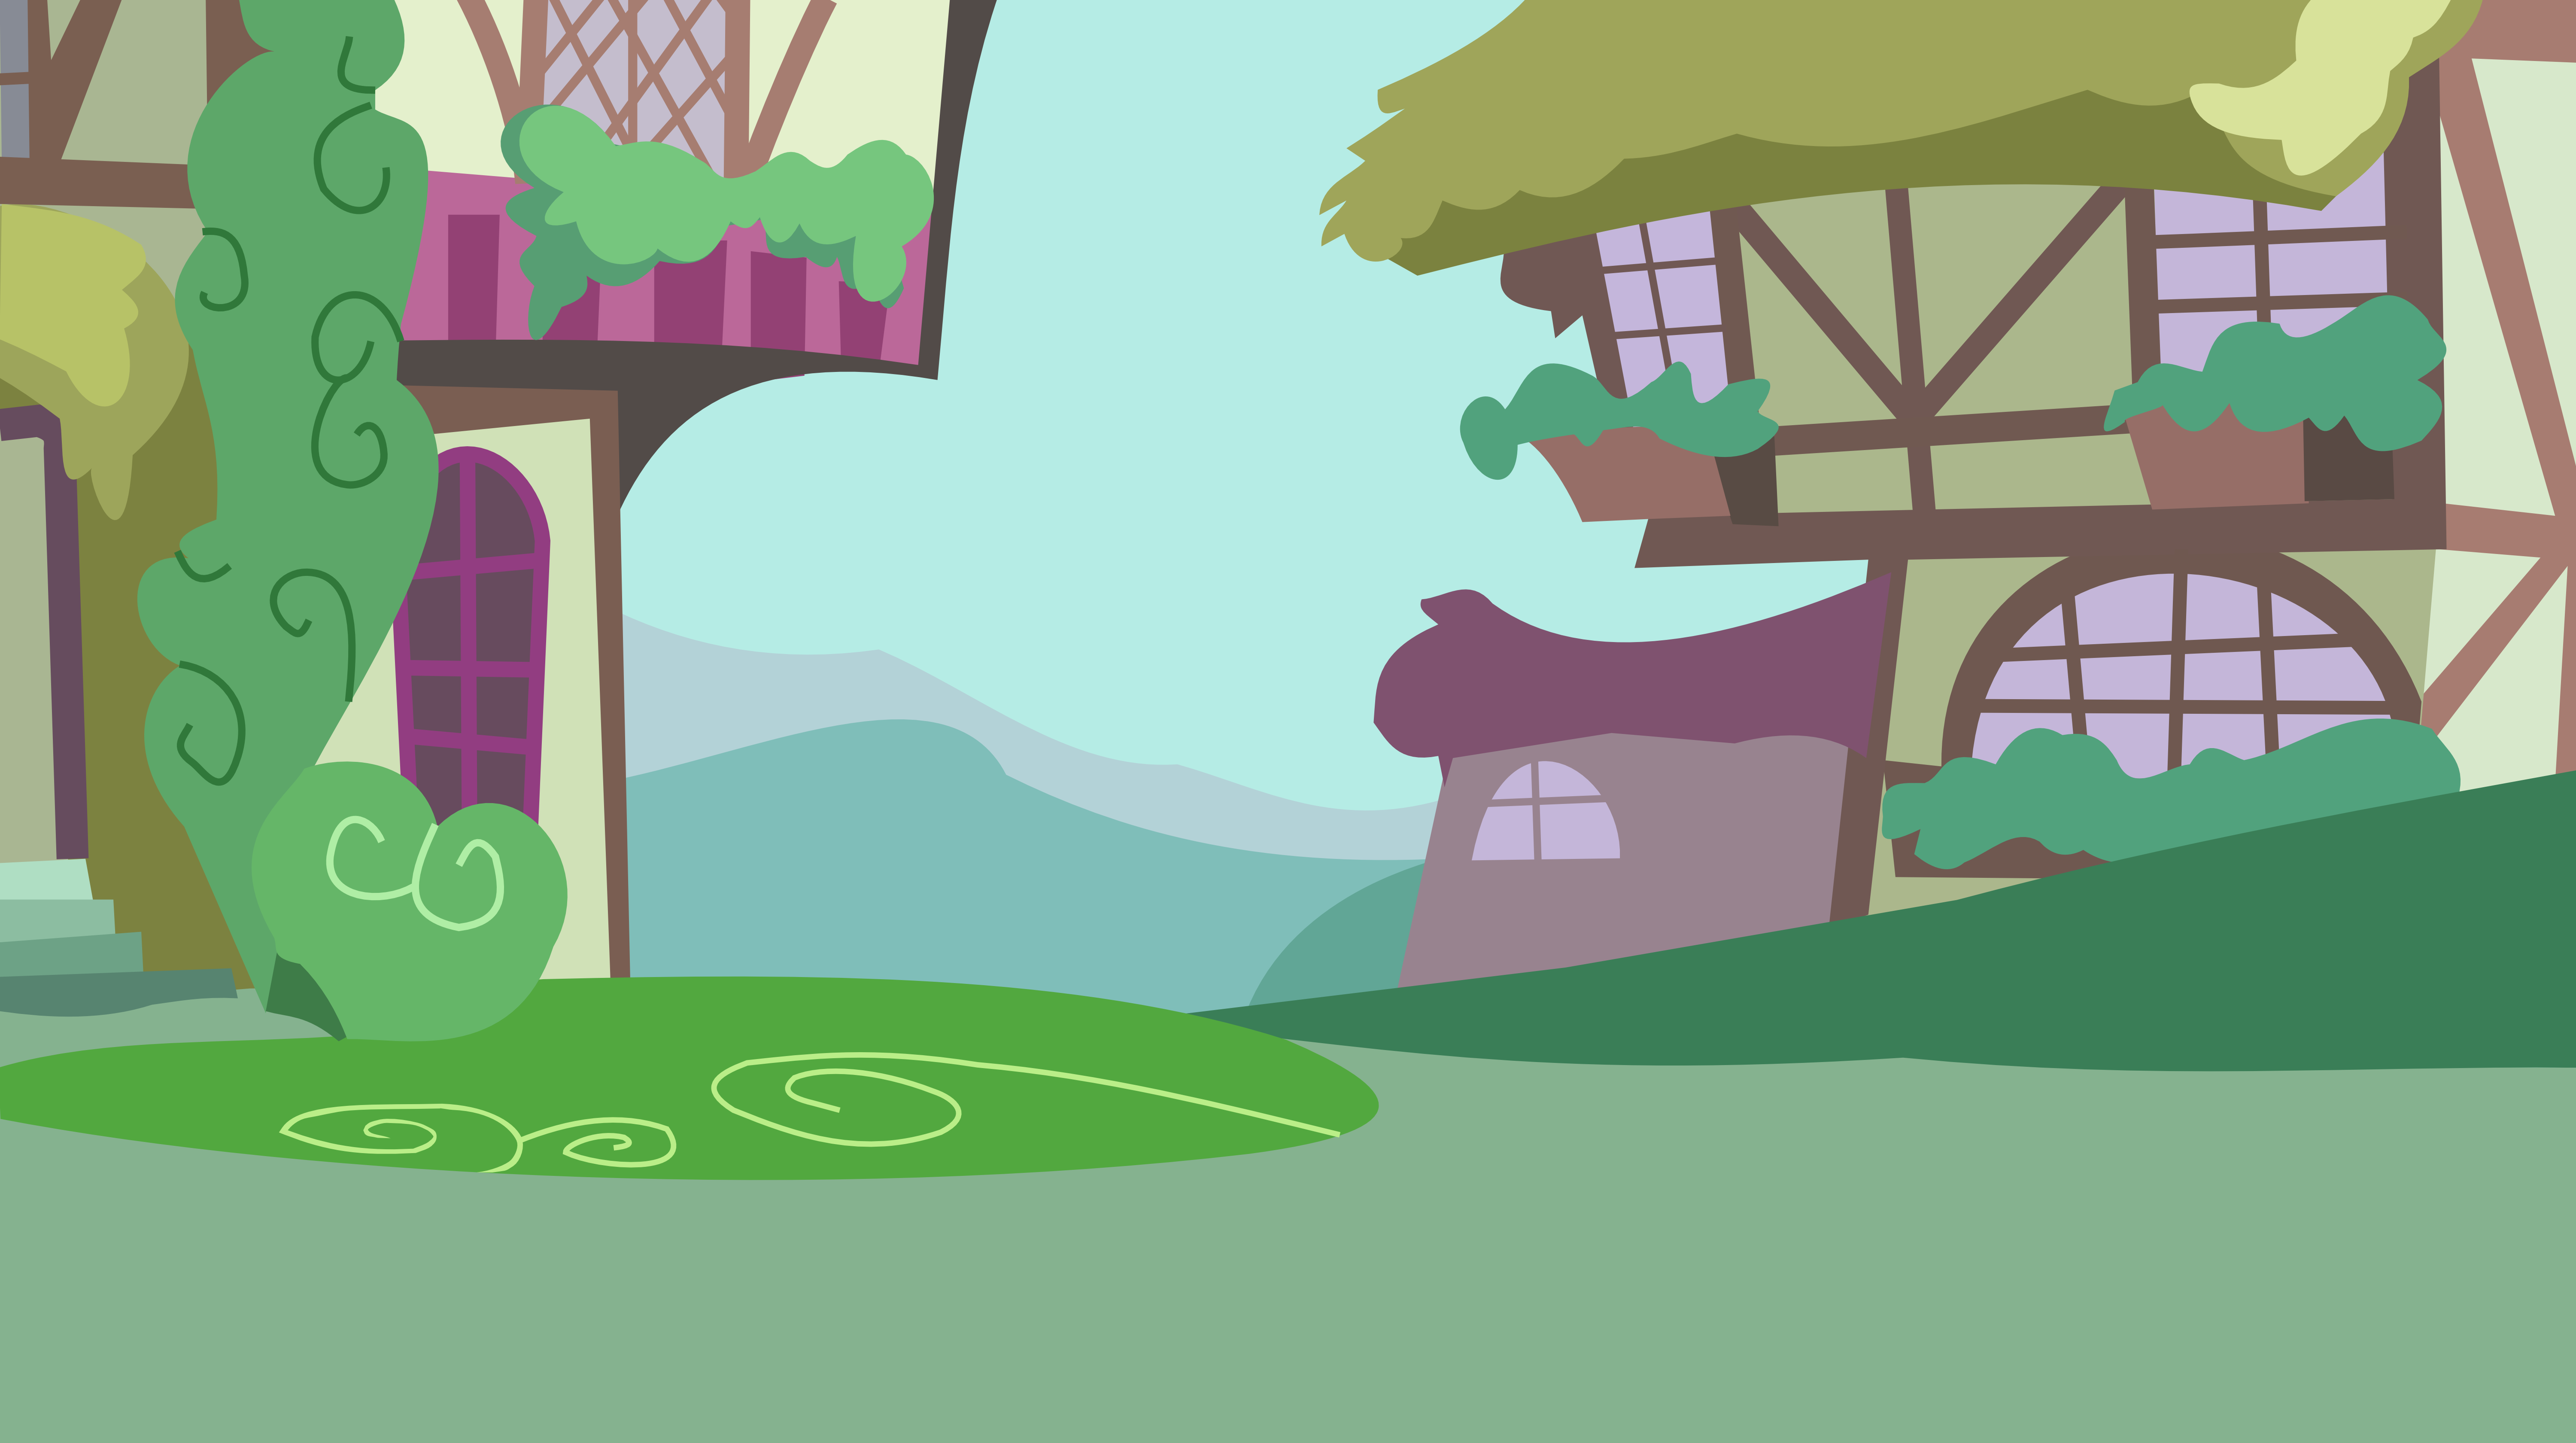 My little pony background Vector by Death-of-all on DeviantArt